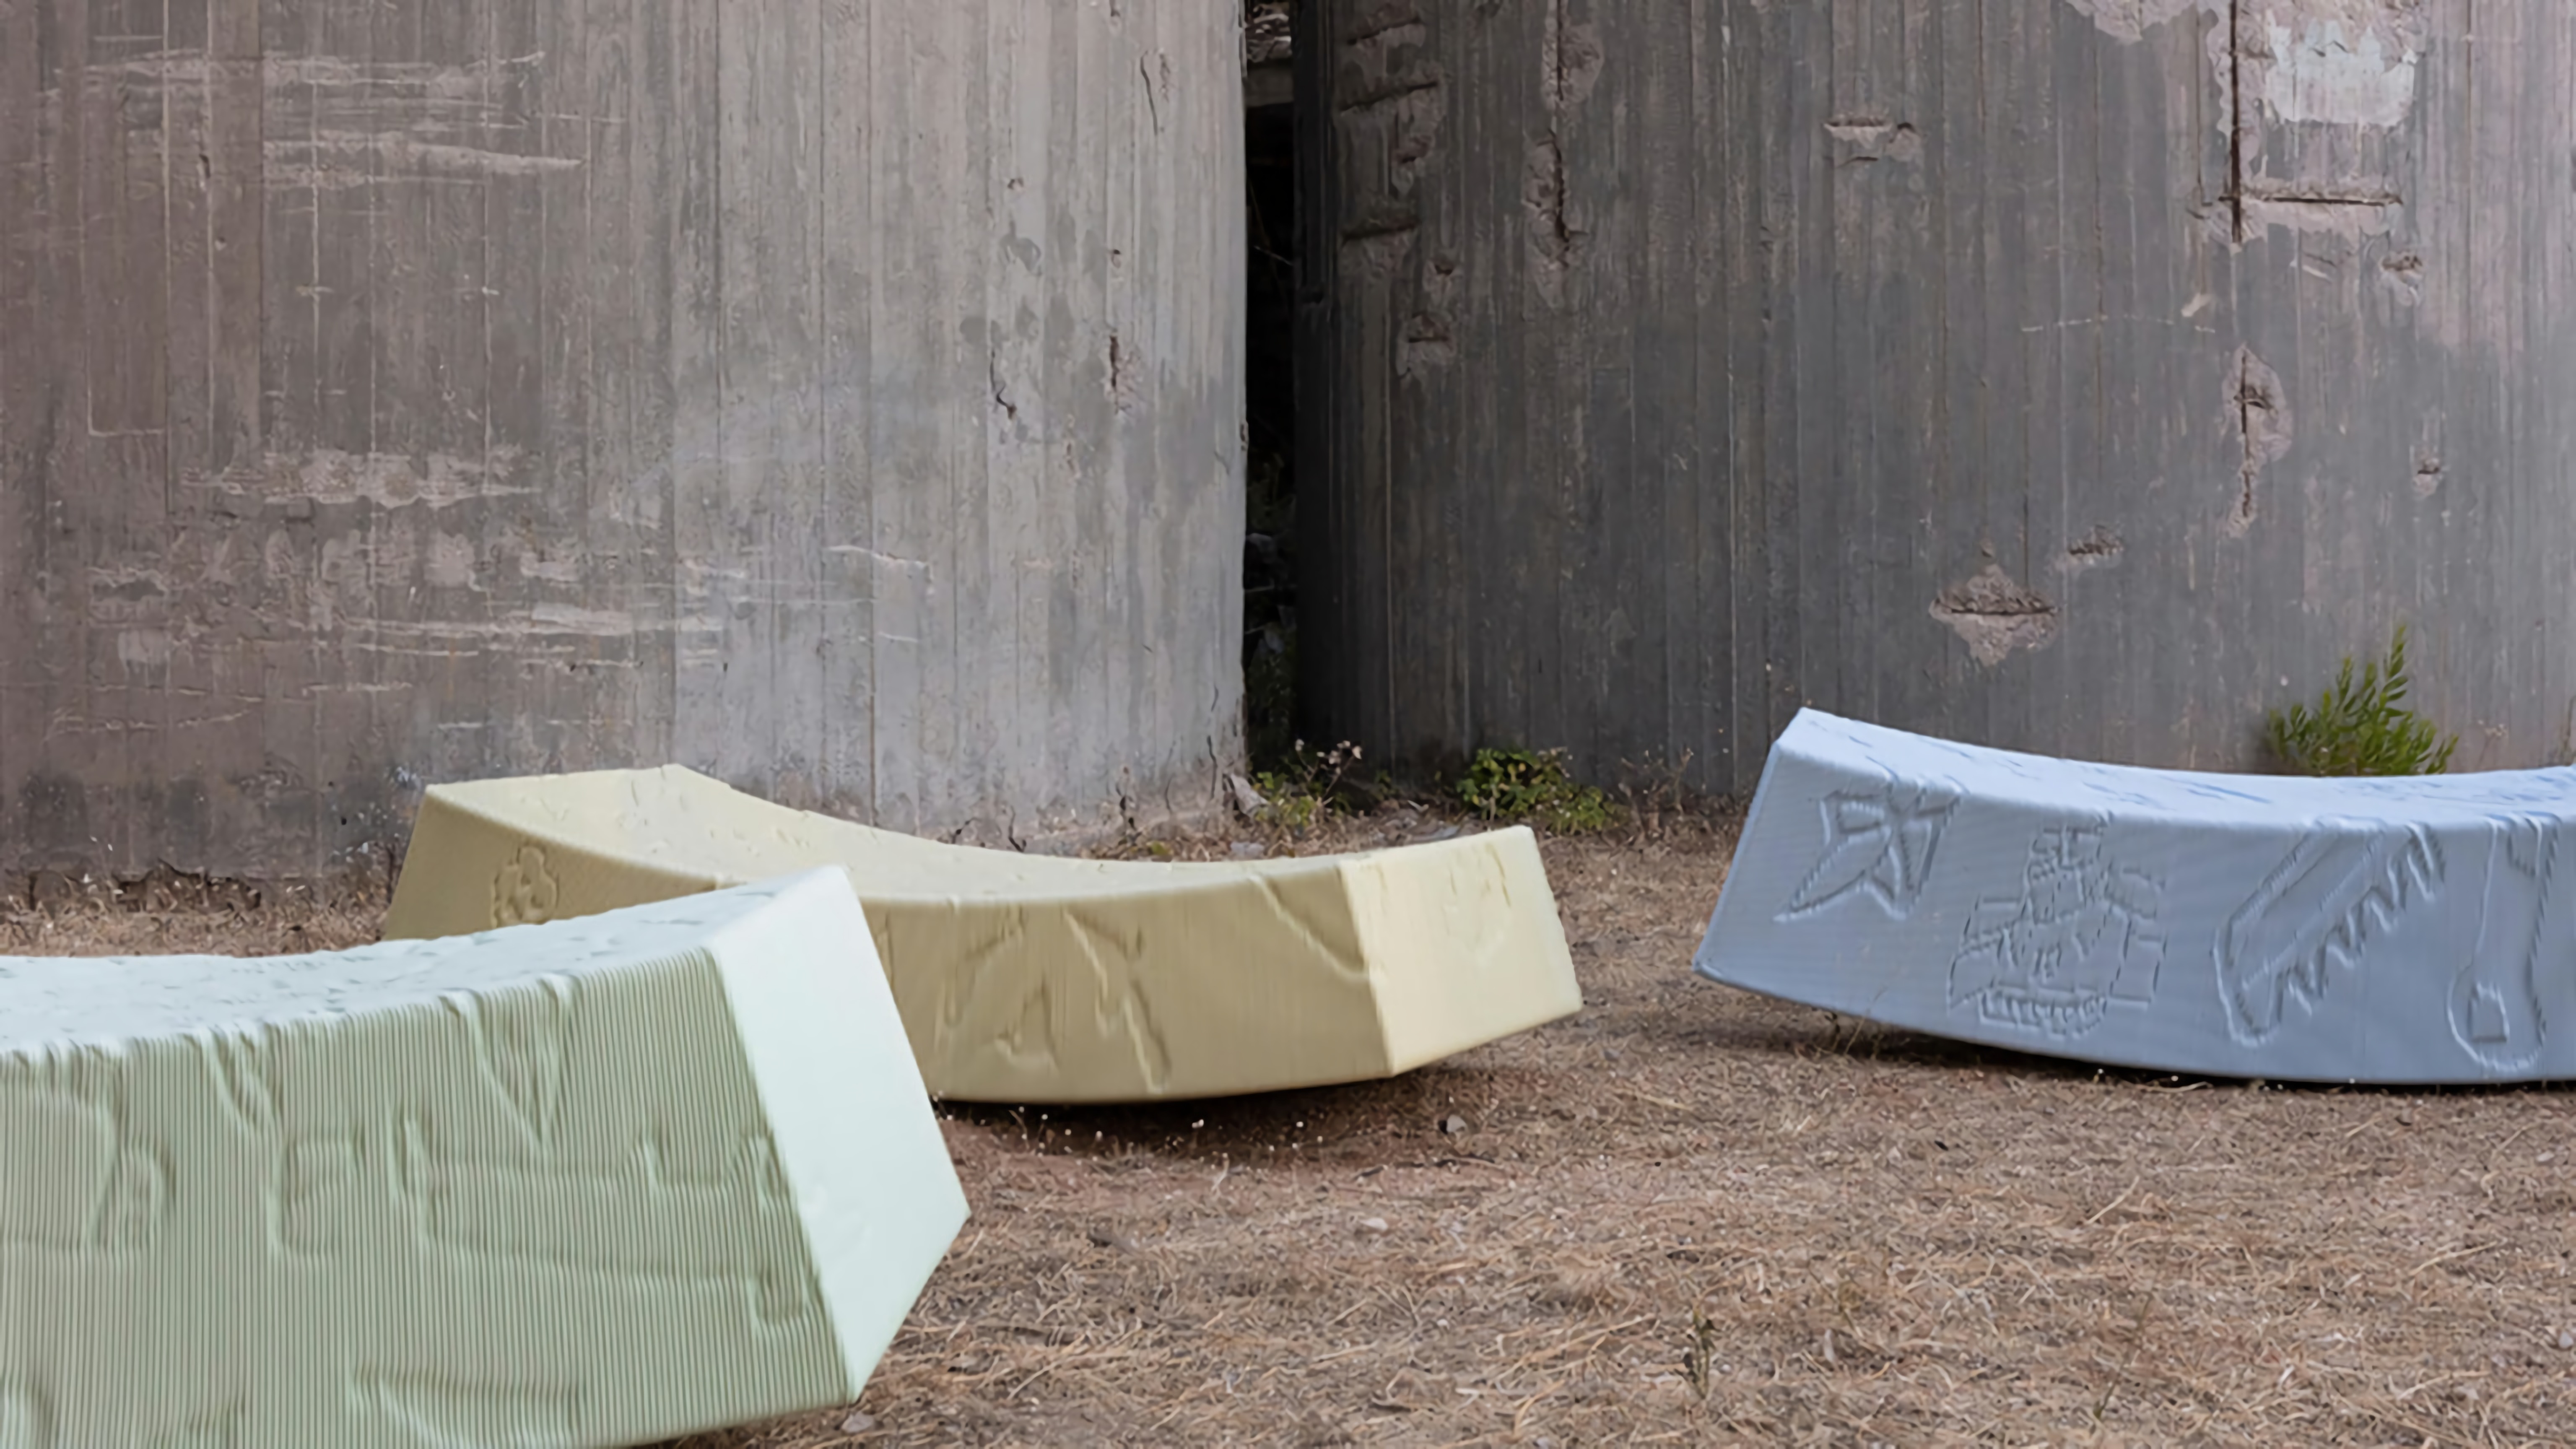 GLYPH: Artistic Furniture from Recycled Plastic and Children's Drawings